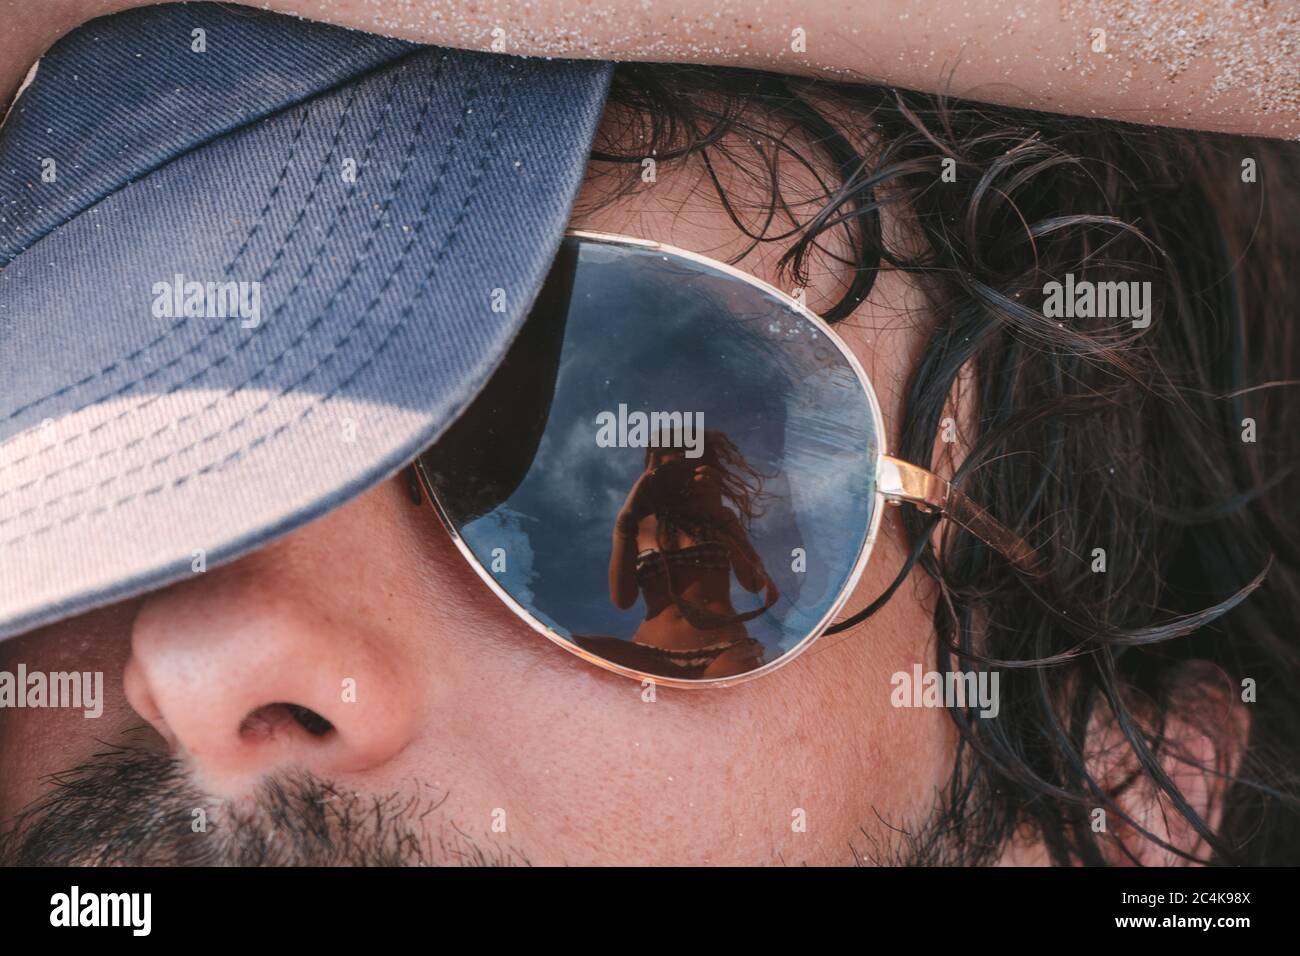 A woman's reflection in a man's sunglasses, as she takes a photo Stock Photo